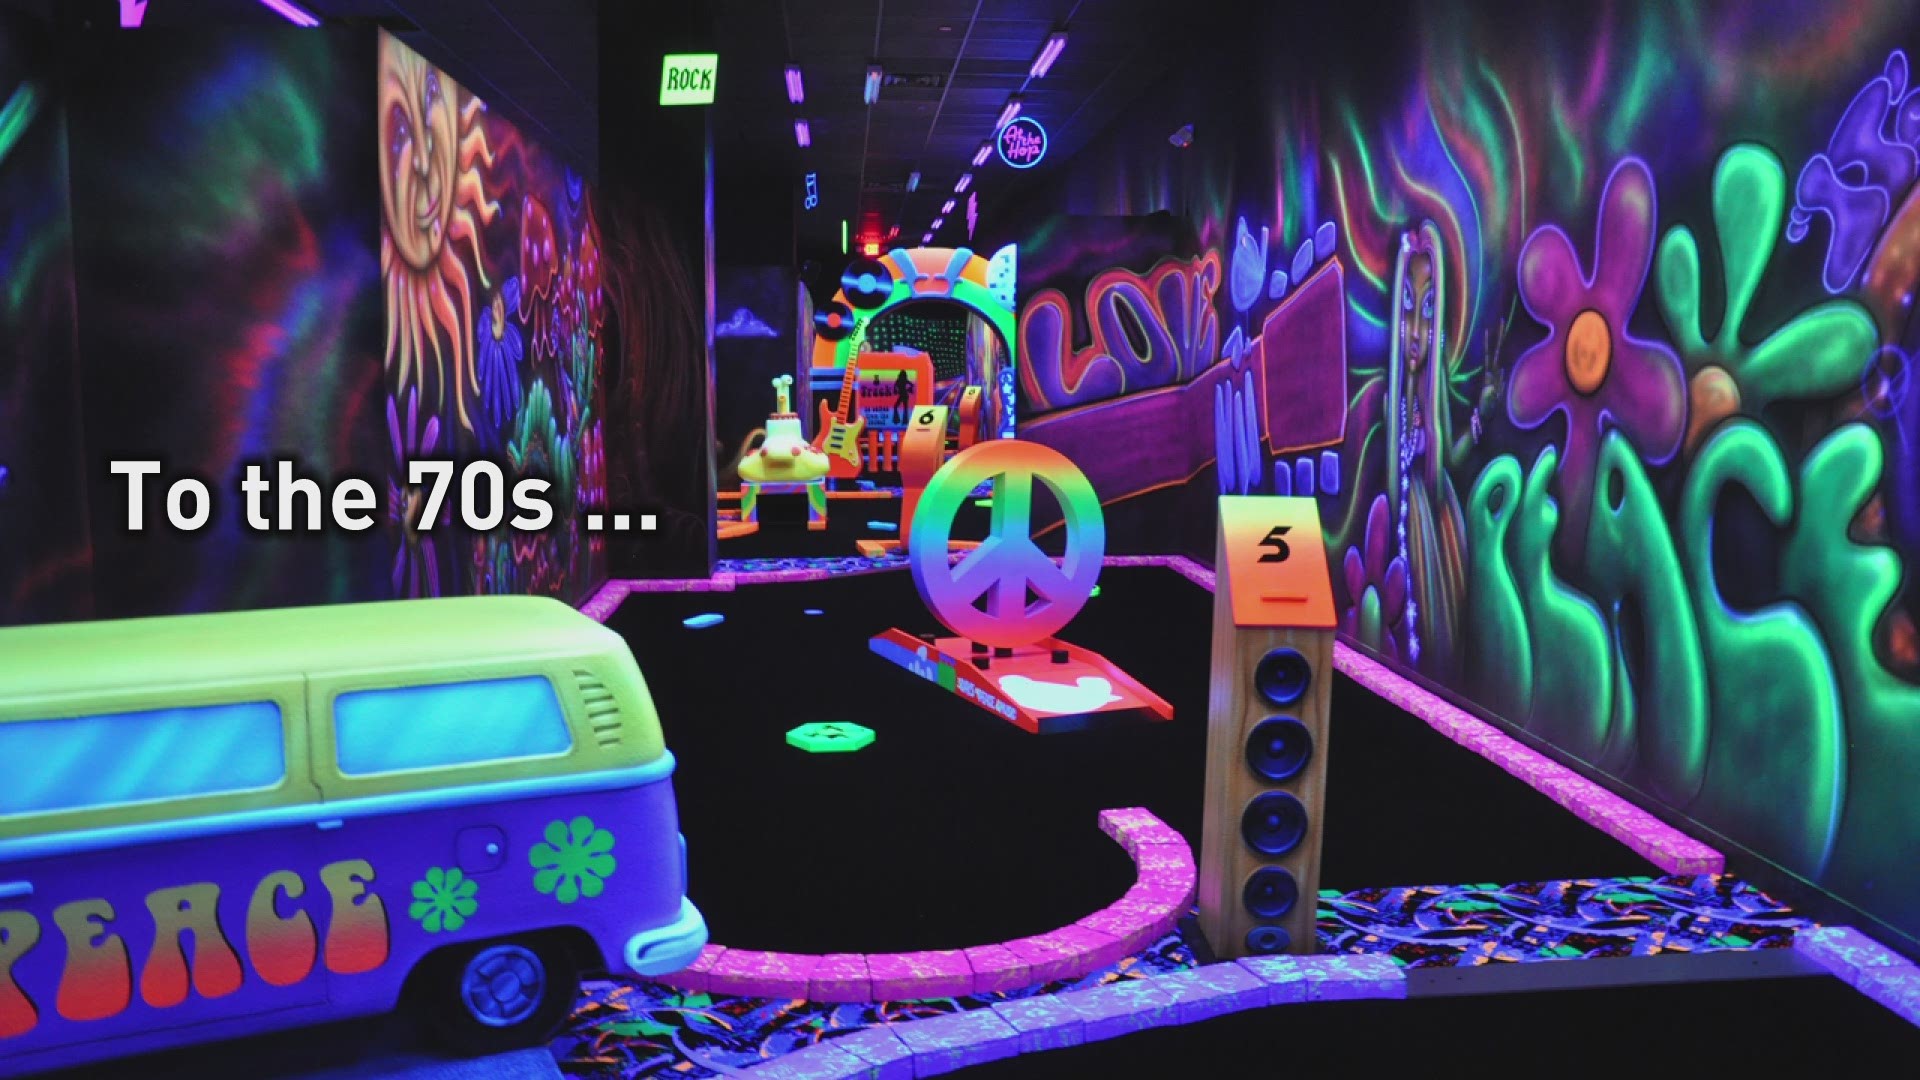 You can now play 18 holes of blacklight minigolf at the Mall of America.